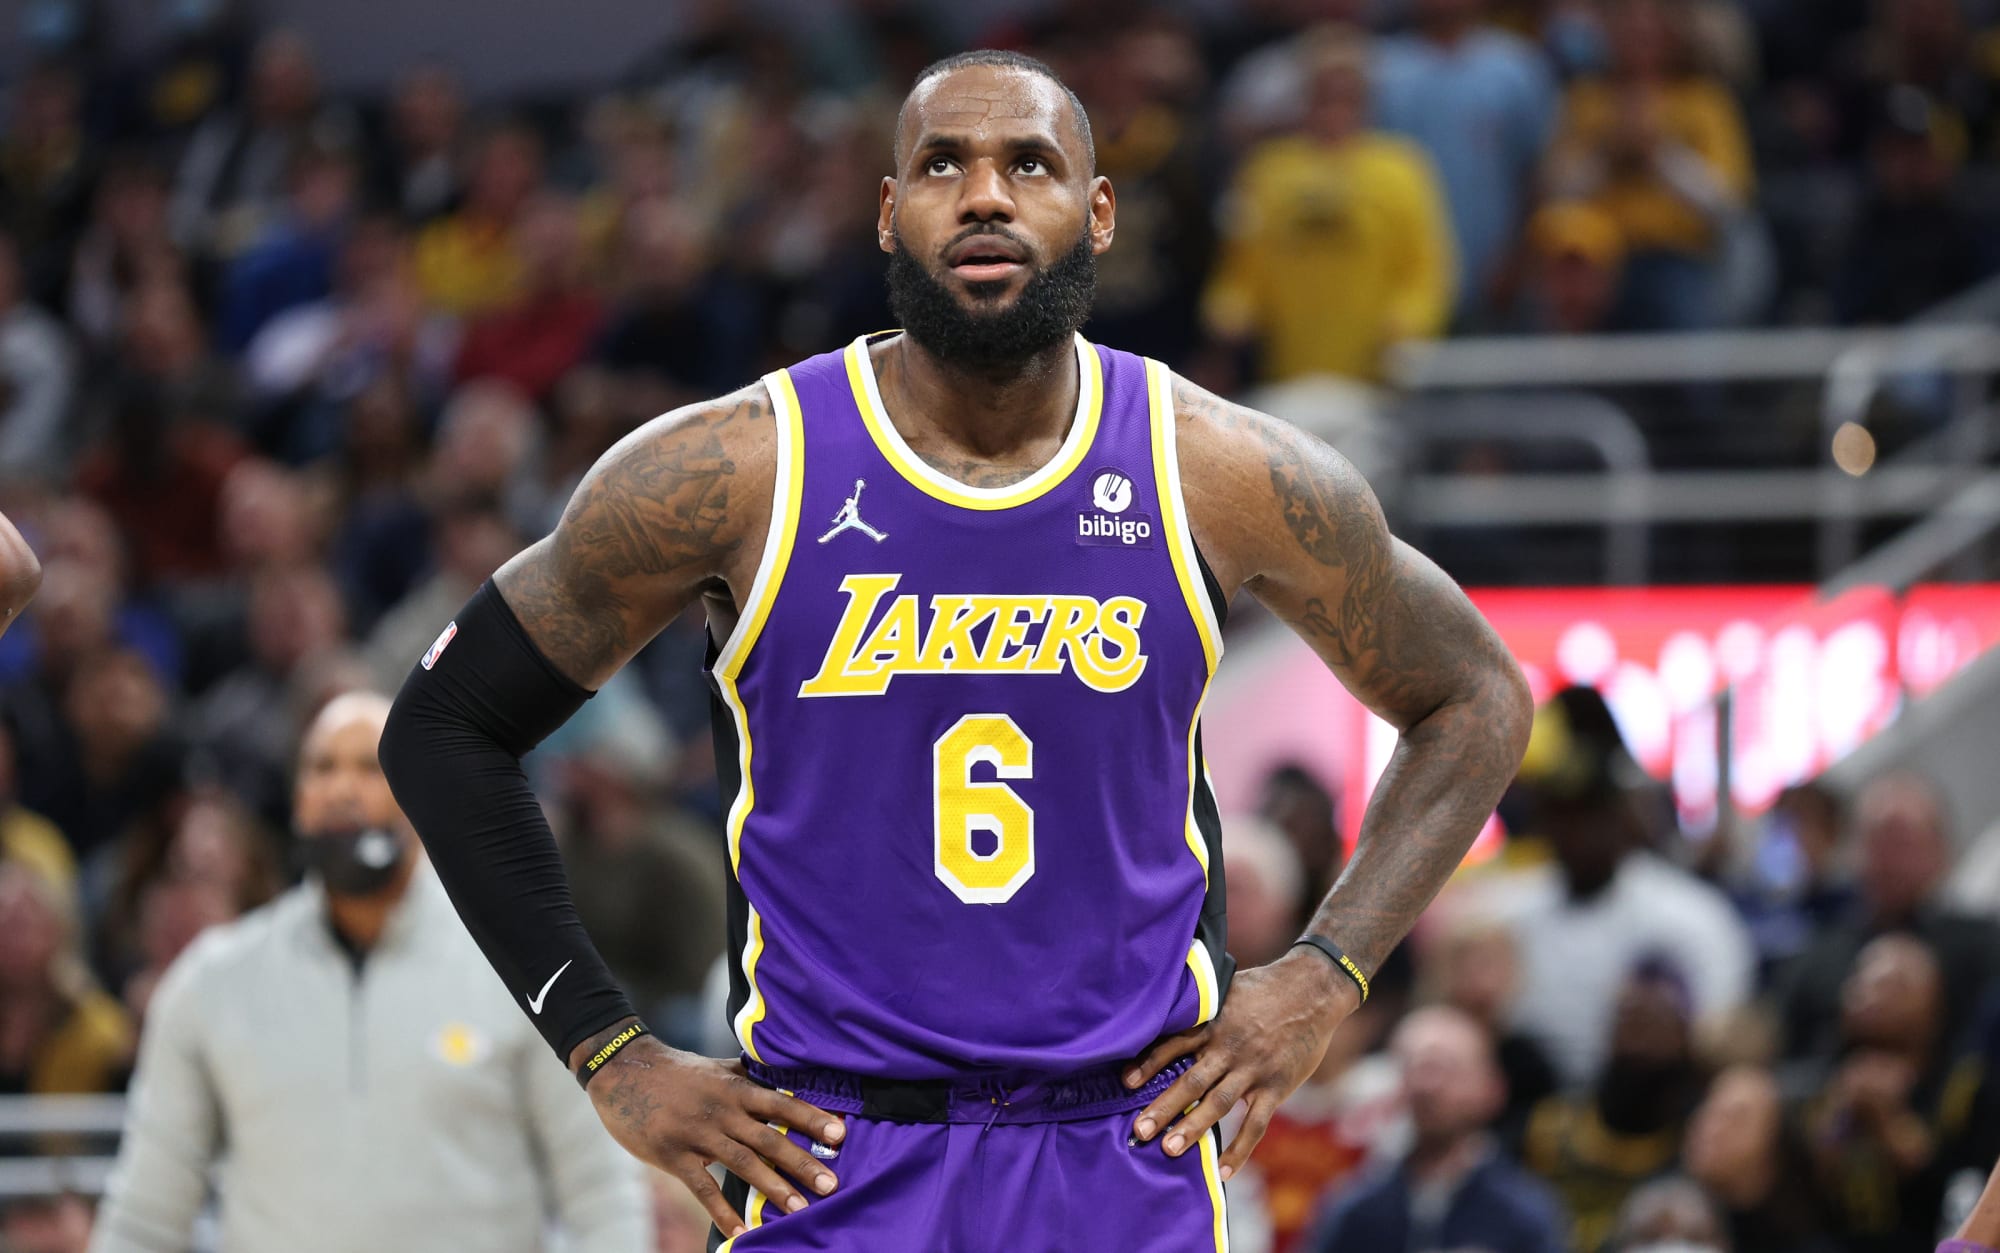 LeBron James injury: How long will ‘The King’ be out?